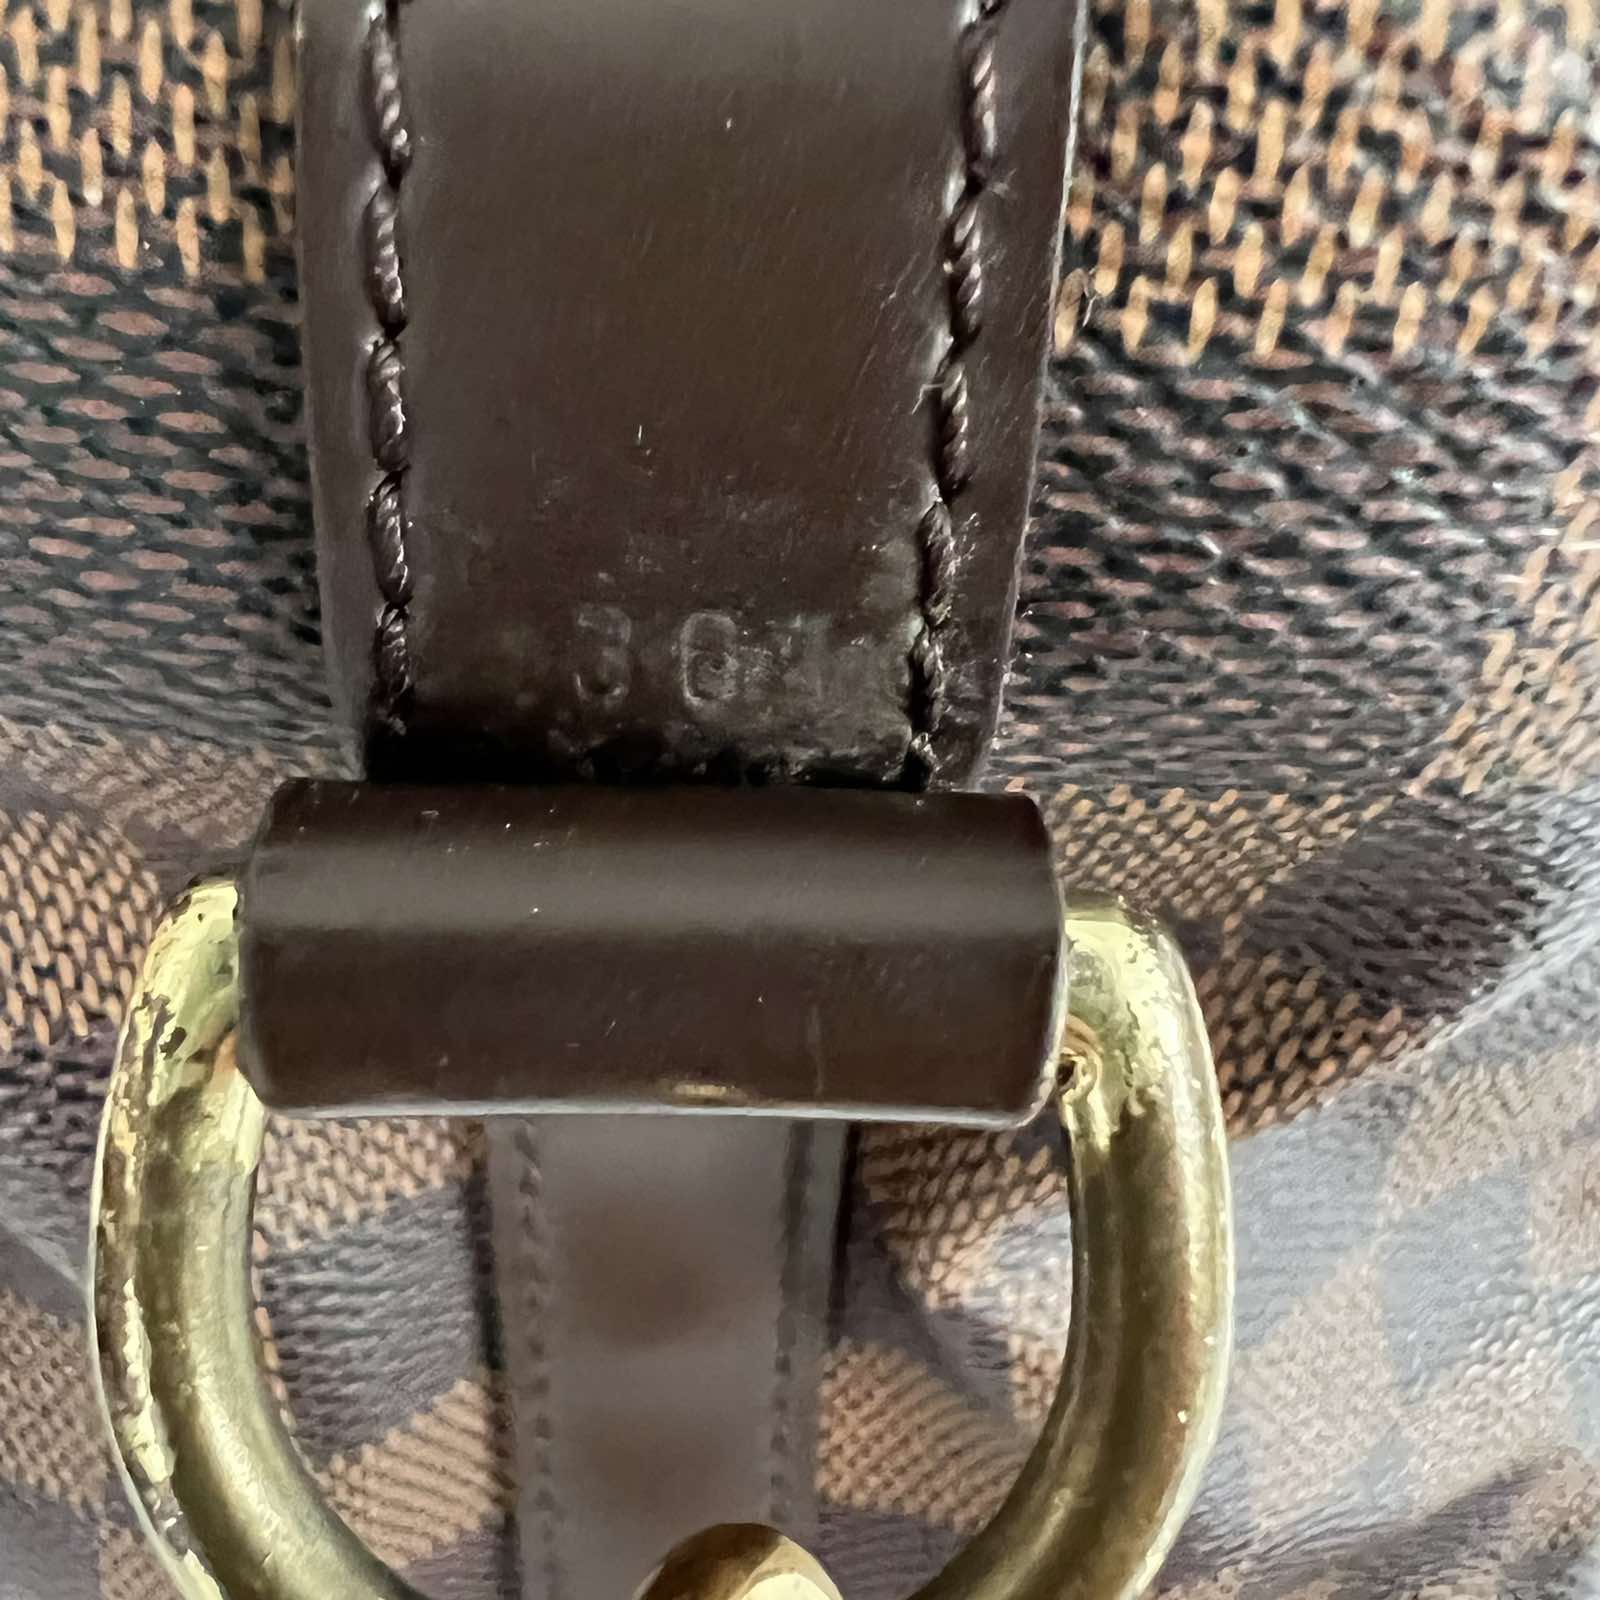 Louis Vuitton Monogram Bandouliere 30. Made in France. DC: CT4270. With  Certificate of Authentication from ENTRUPY.